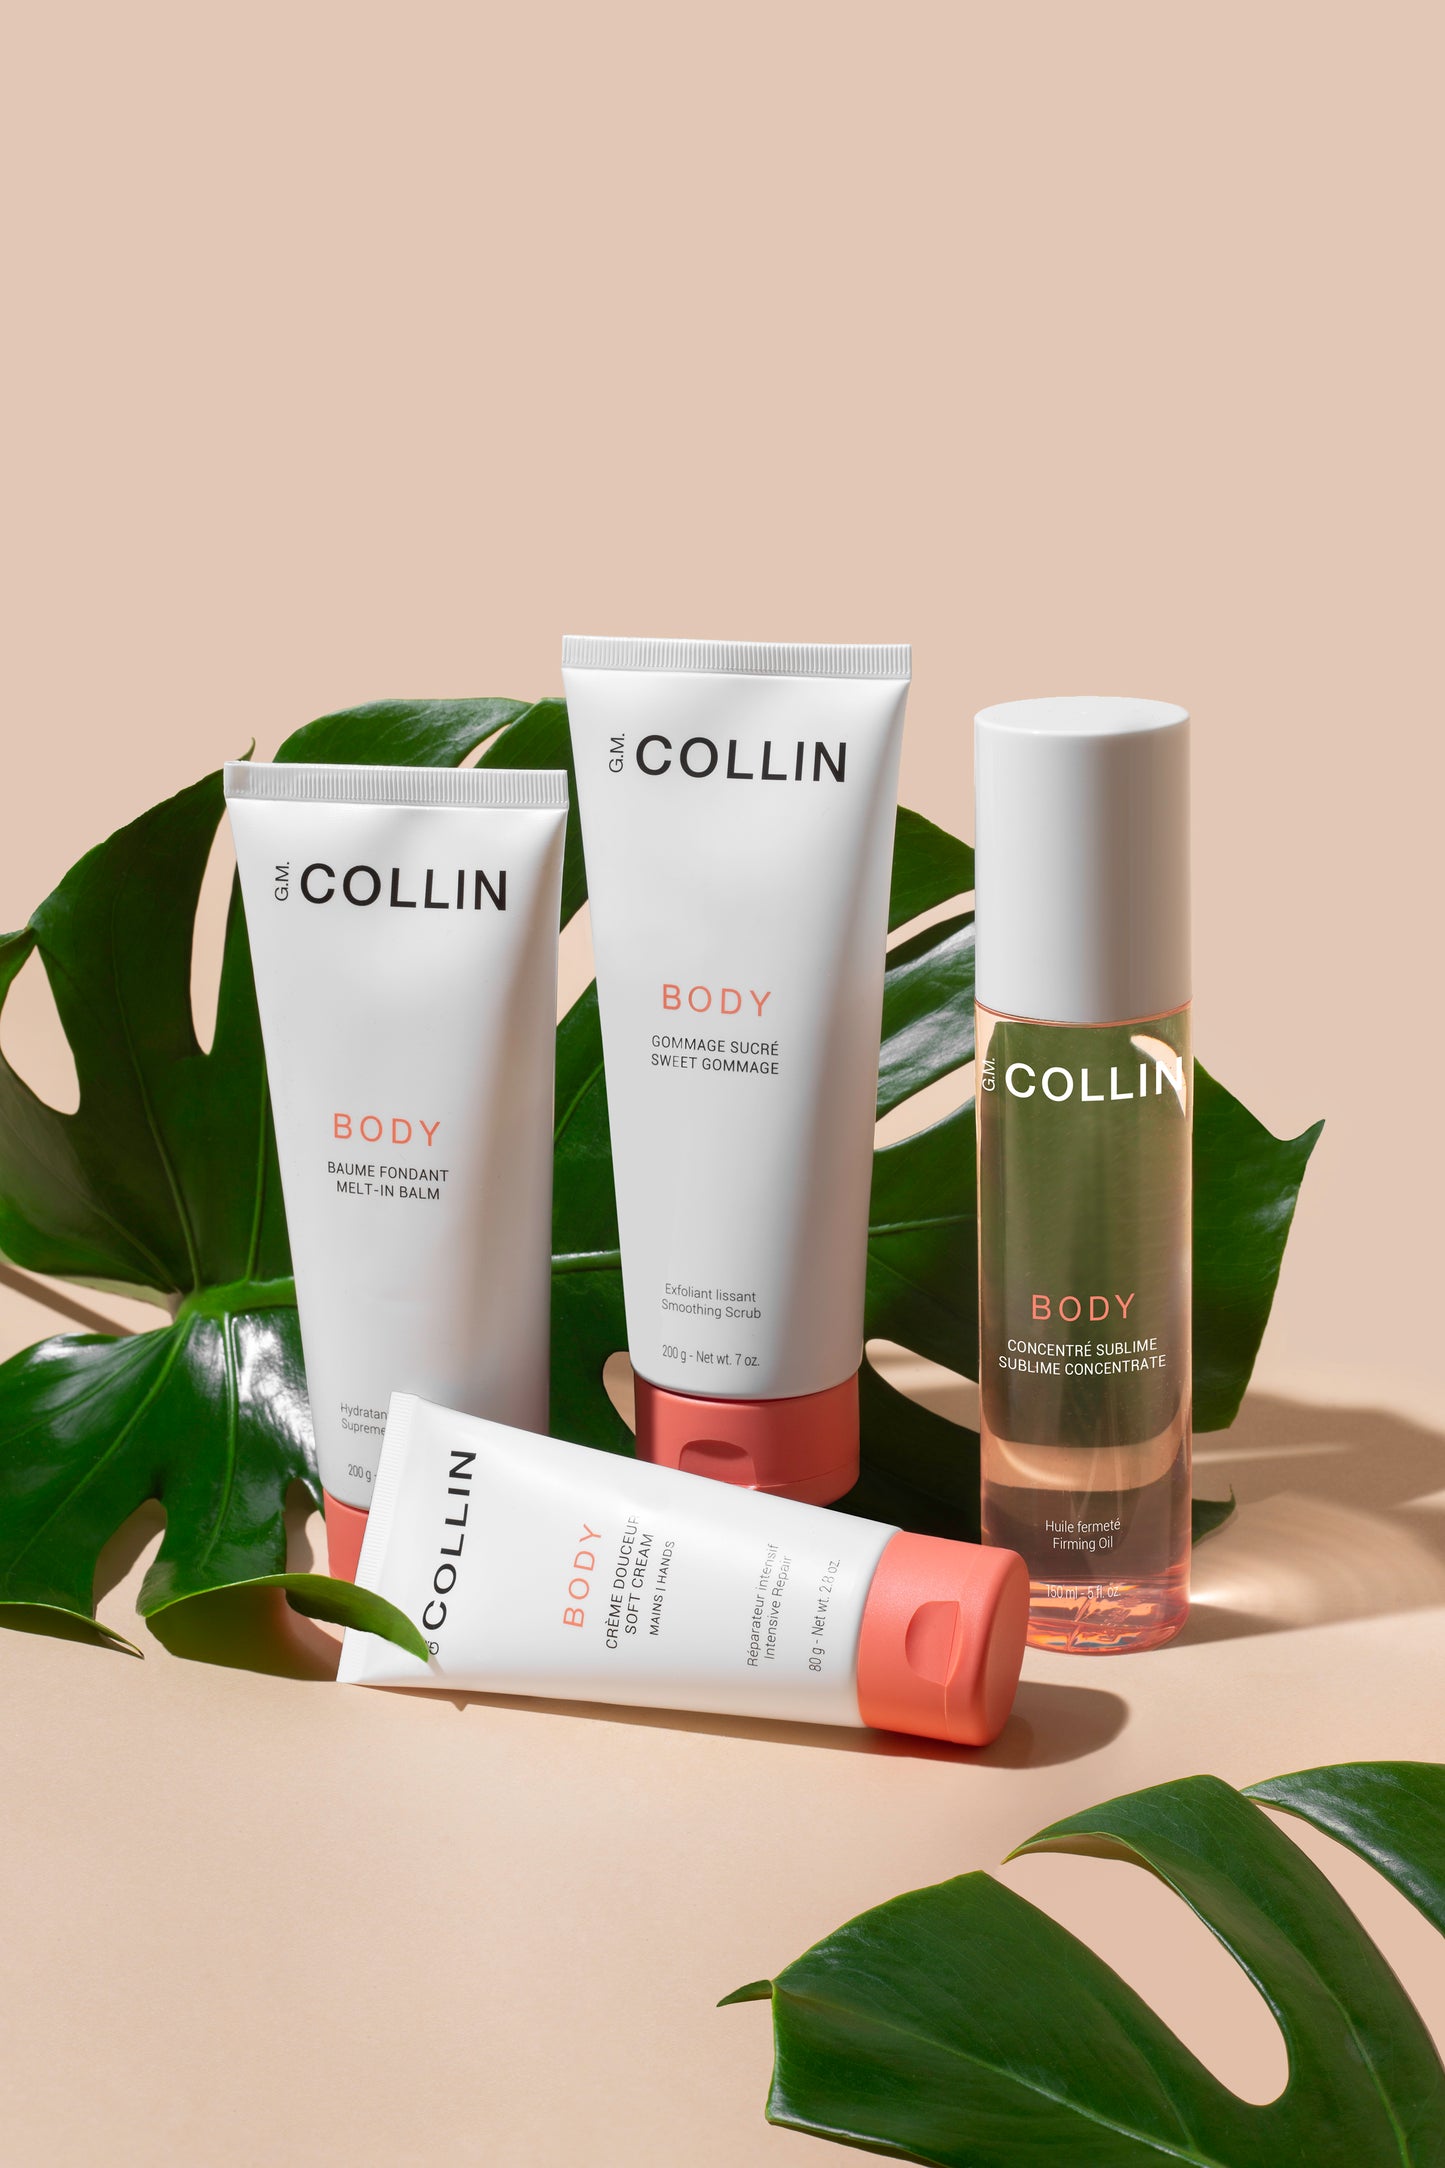 GM COLLIN Melt-in Balm for the Body